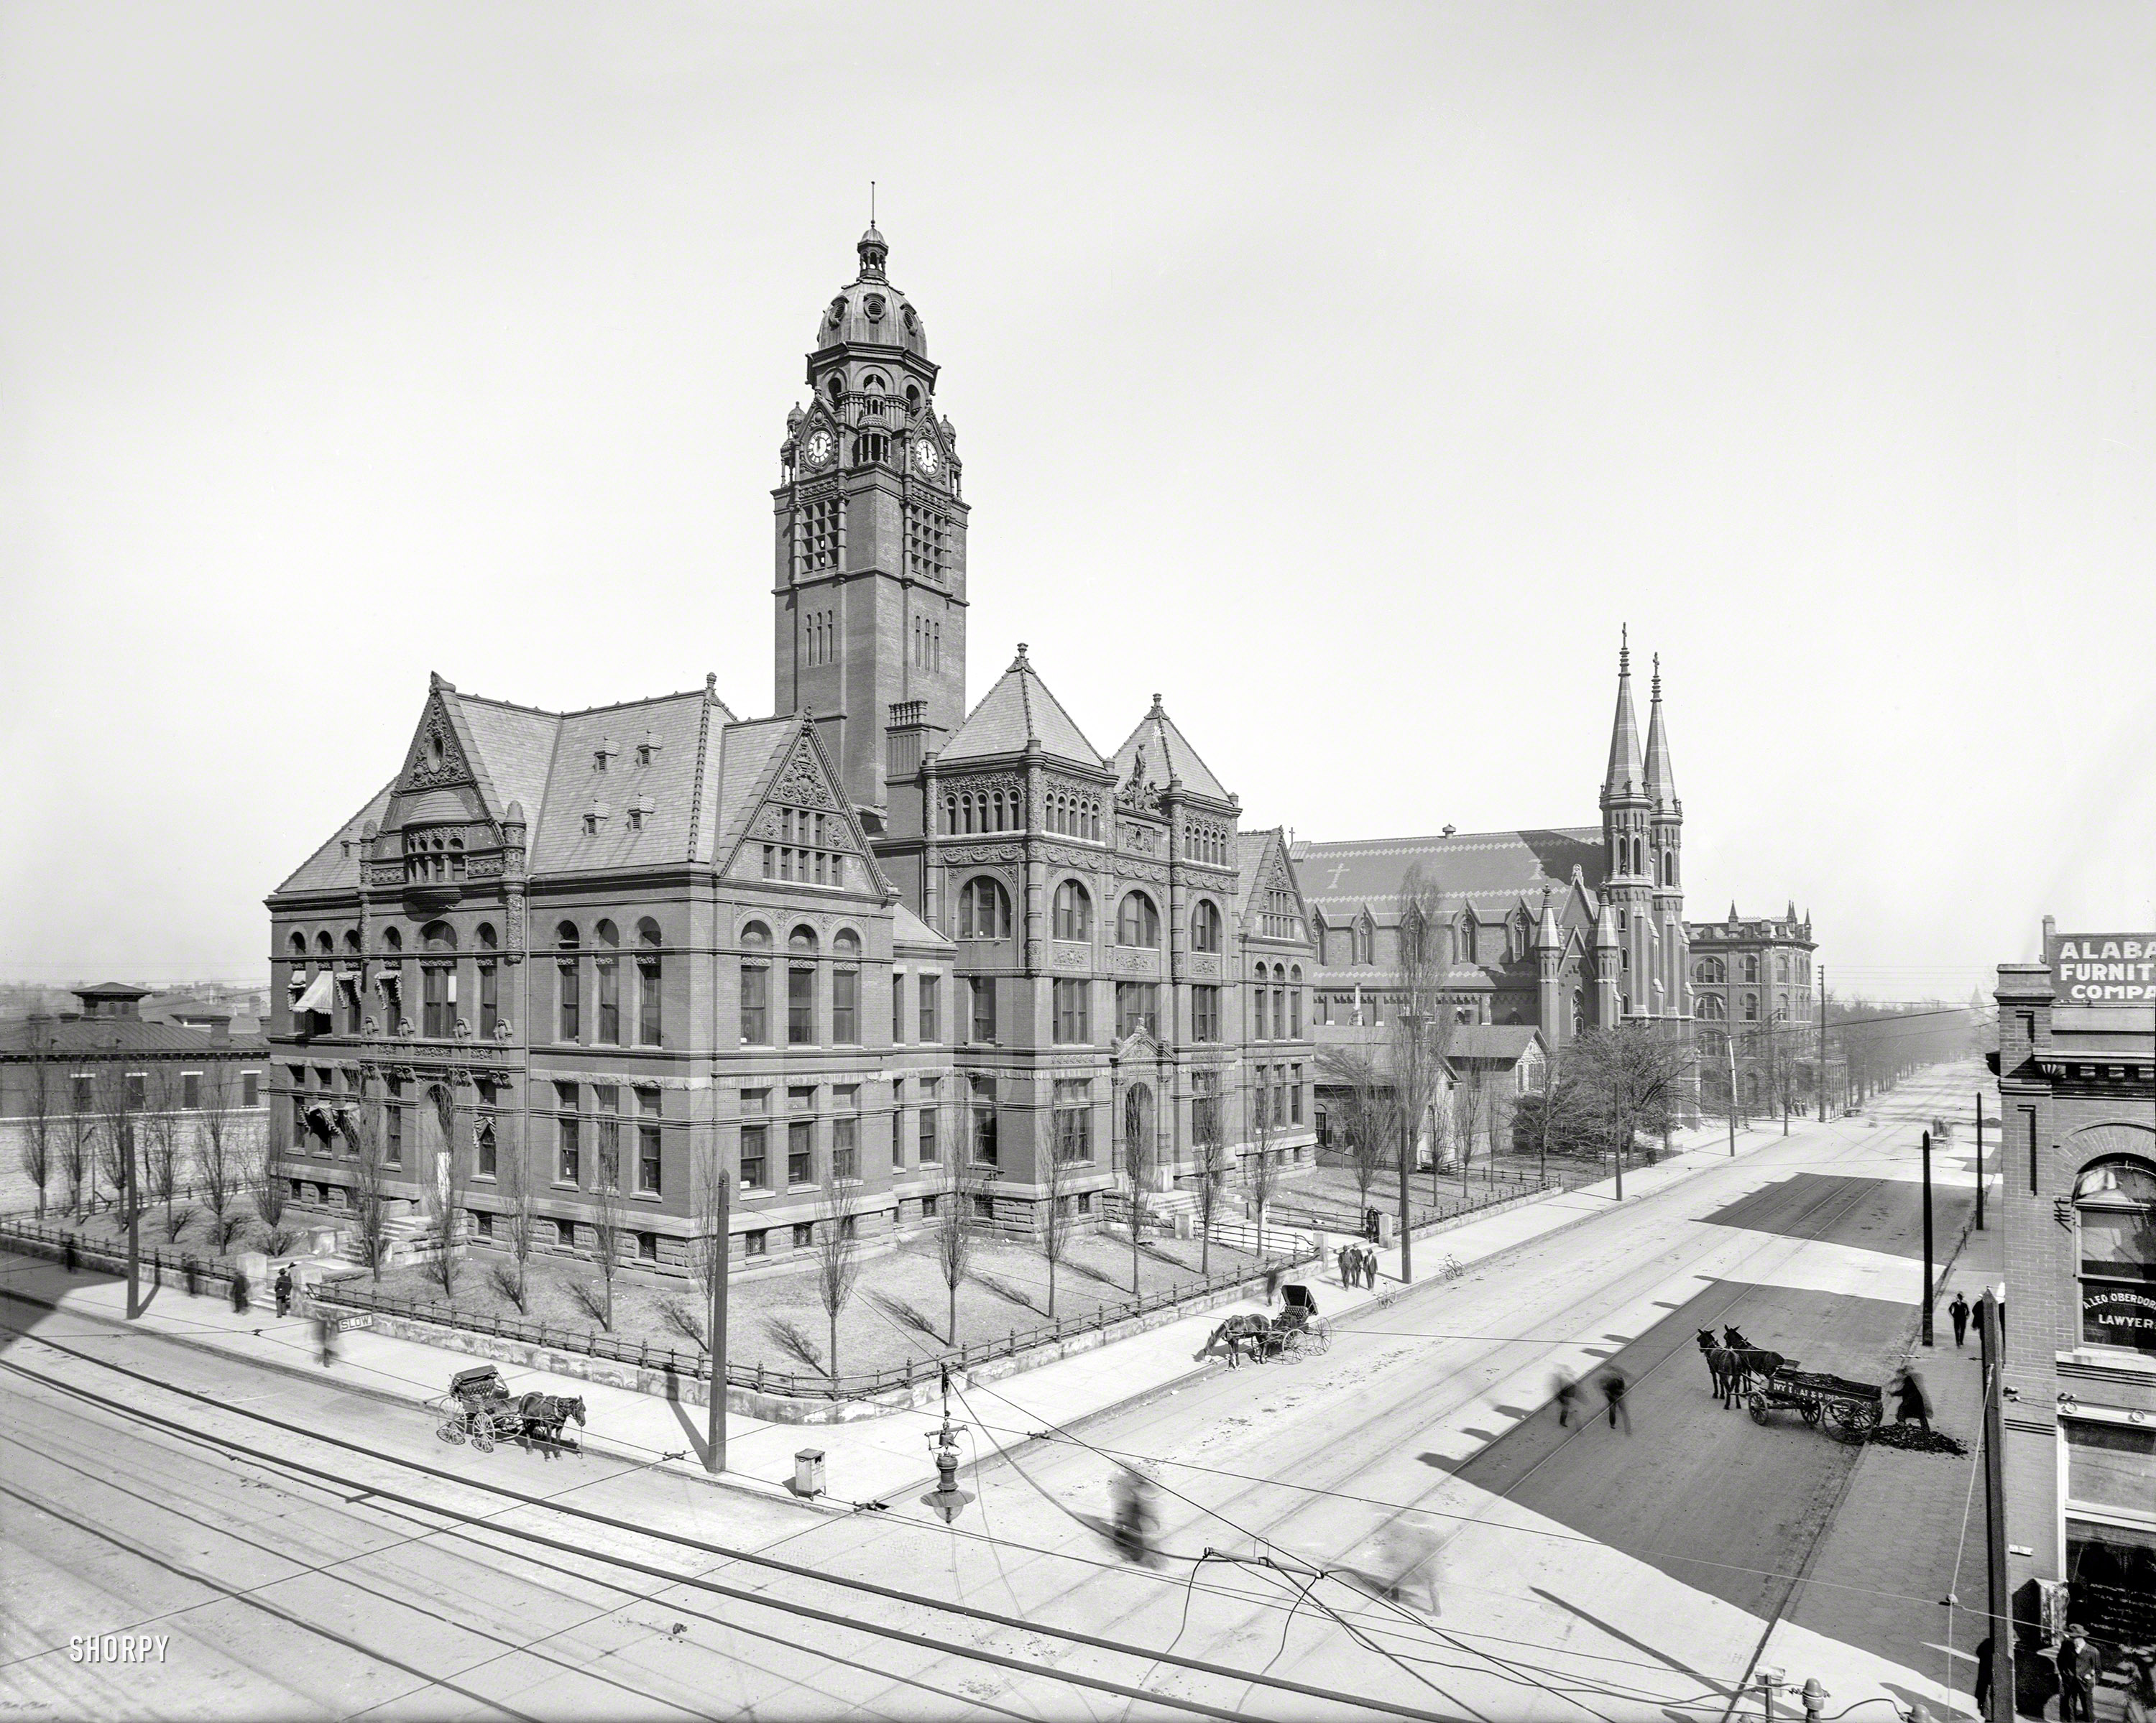 1906. "Birmingham, Alabama -- Jefferson County Courthouse and St. Paul's Church." 8x10 inch glass negative, Detroit Publishing Company. View full size.